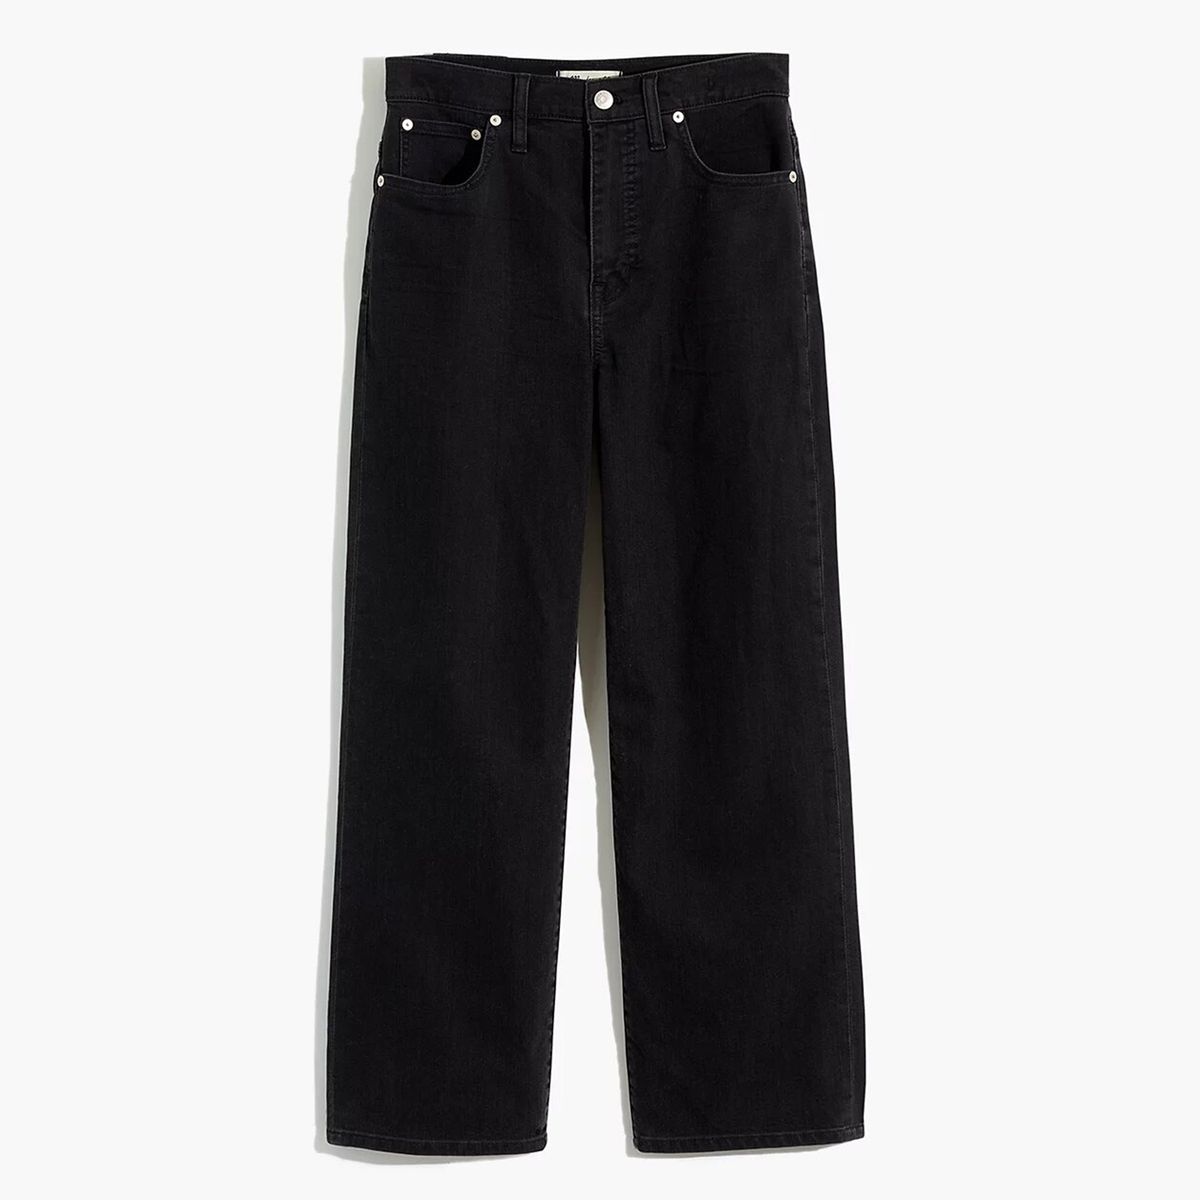 Madewell’s $75 Jeans Sale: Flattering Denim Perfect for Fall | InStyle